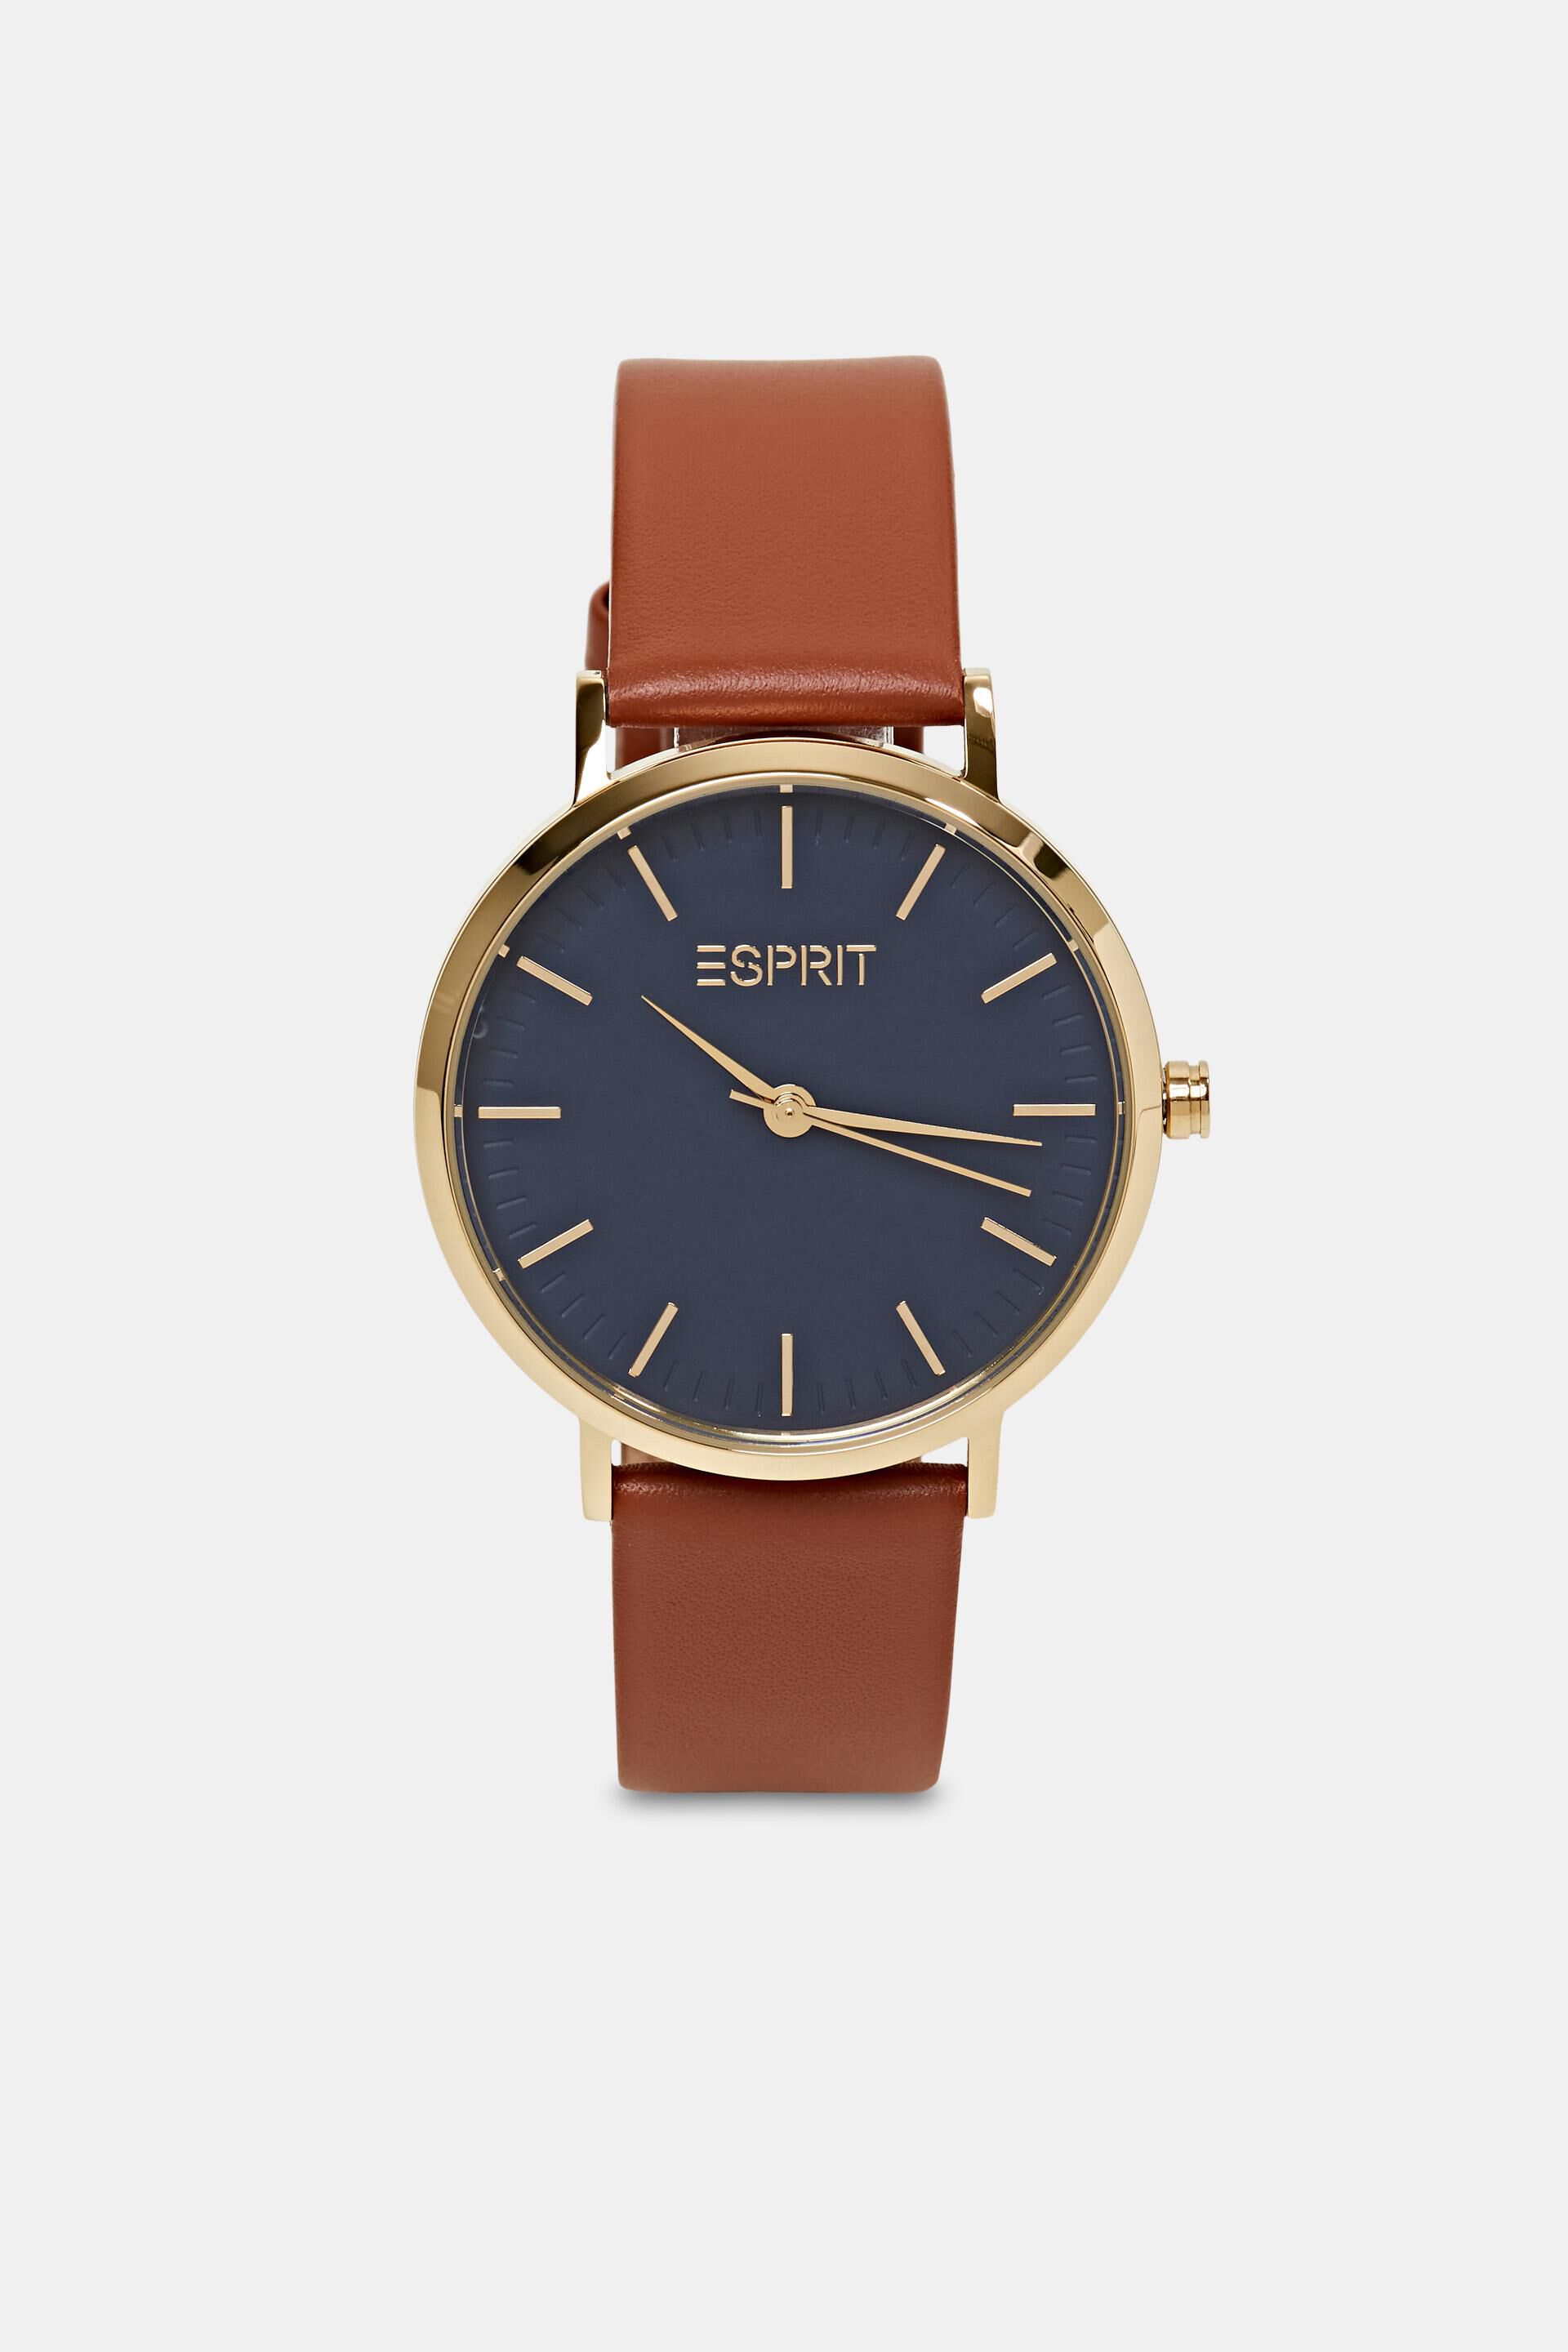 Esprit Leather Watch Gold-Tone Stainless Steel